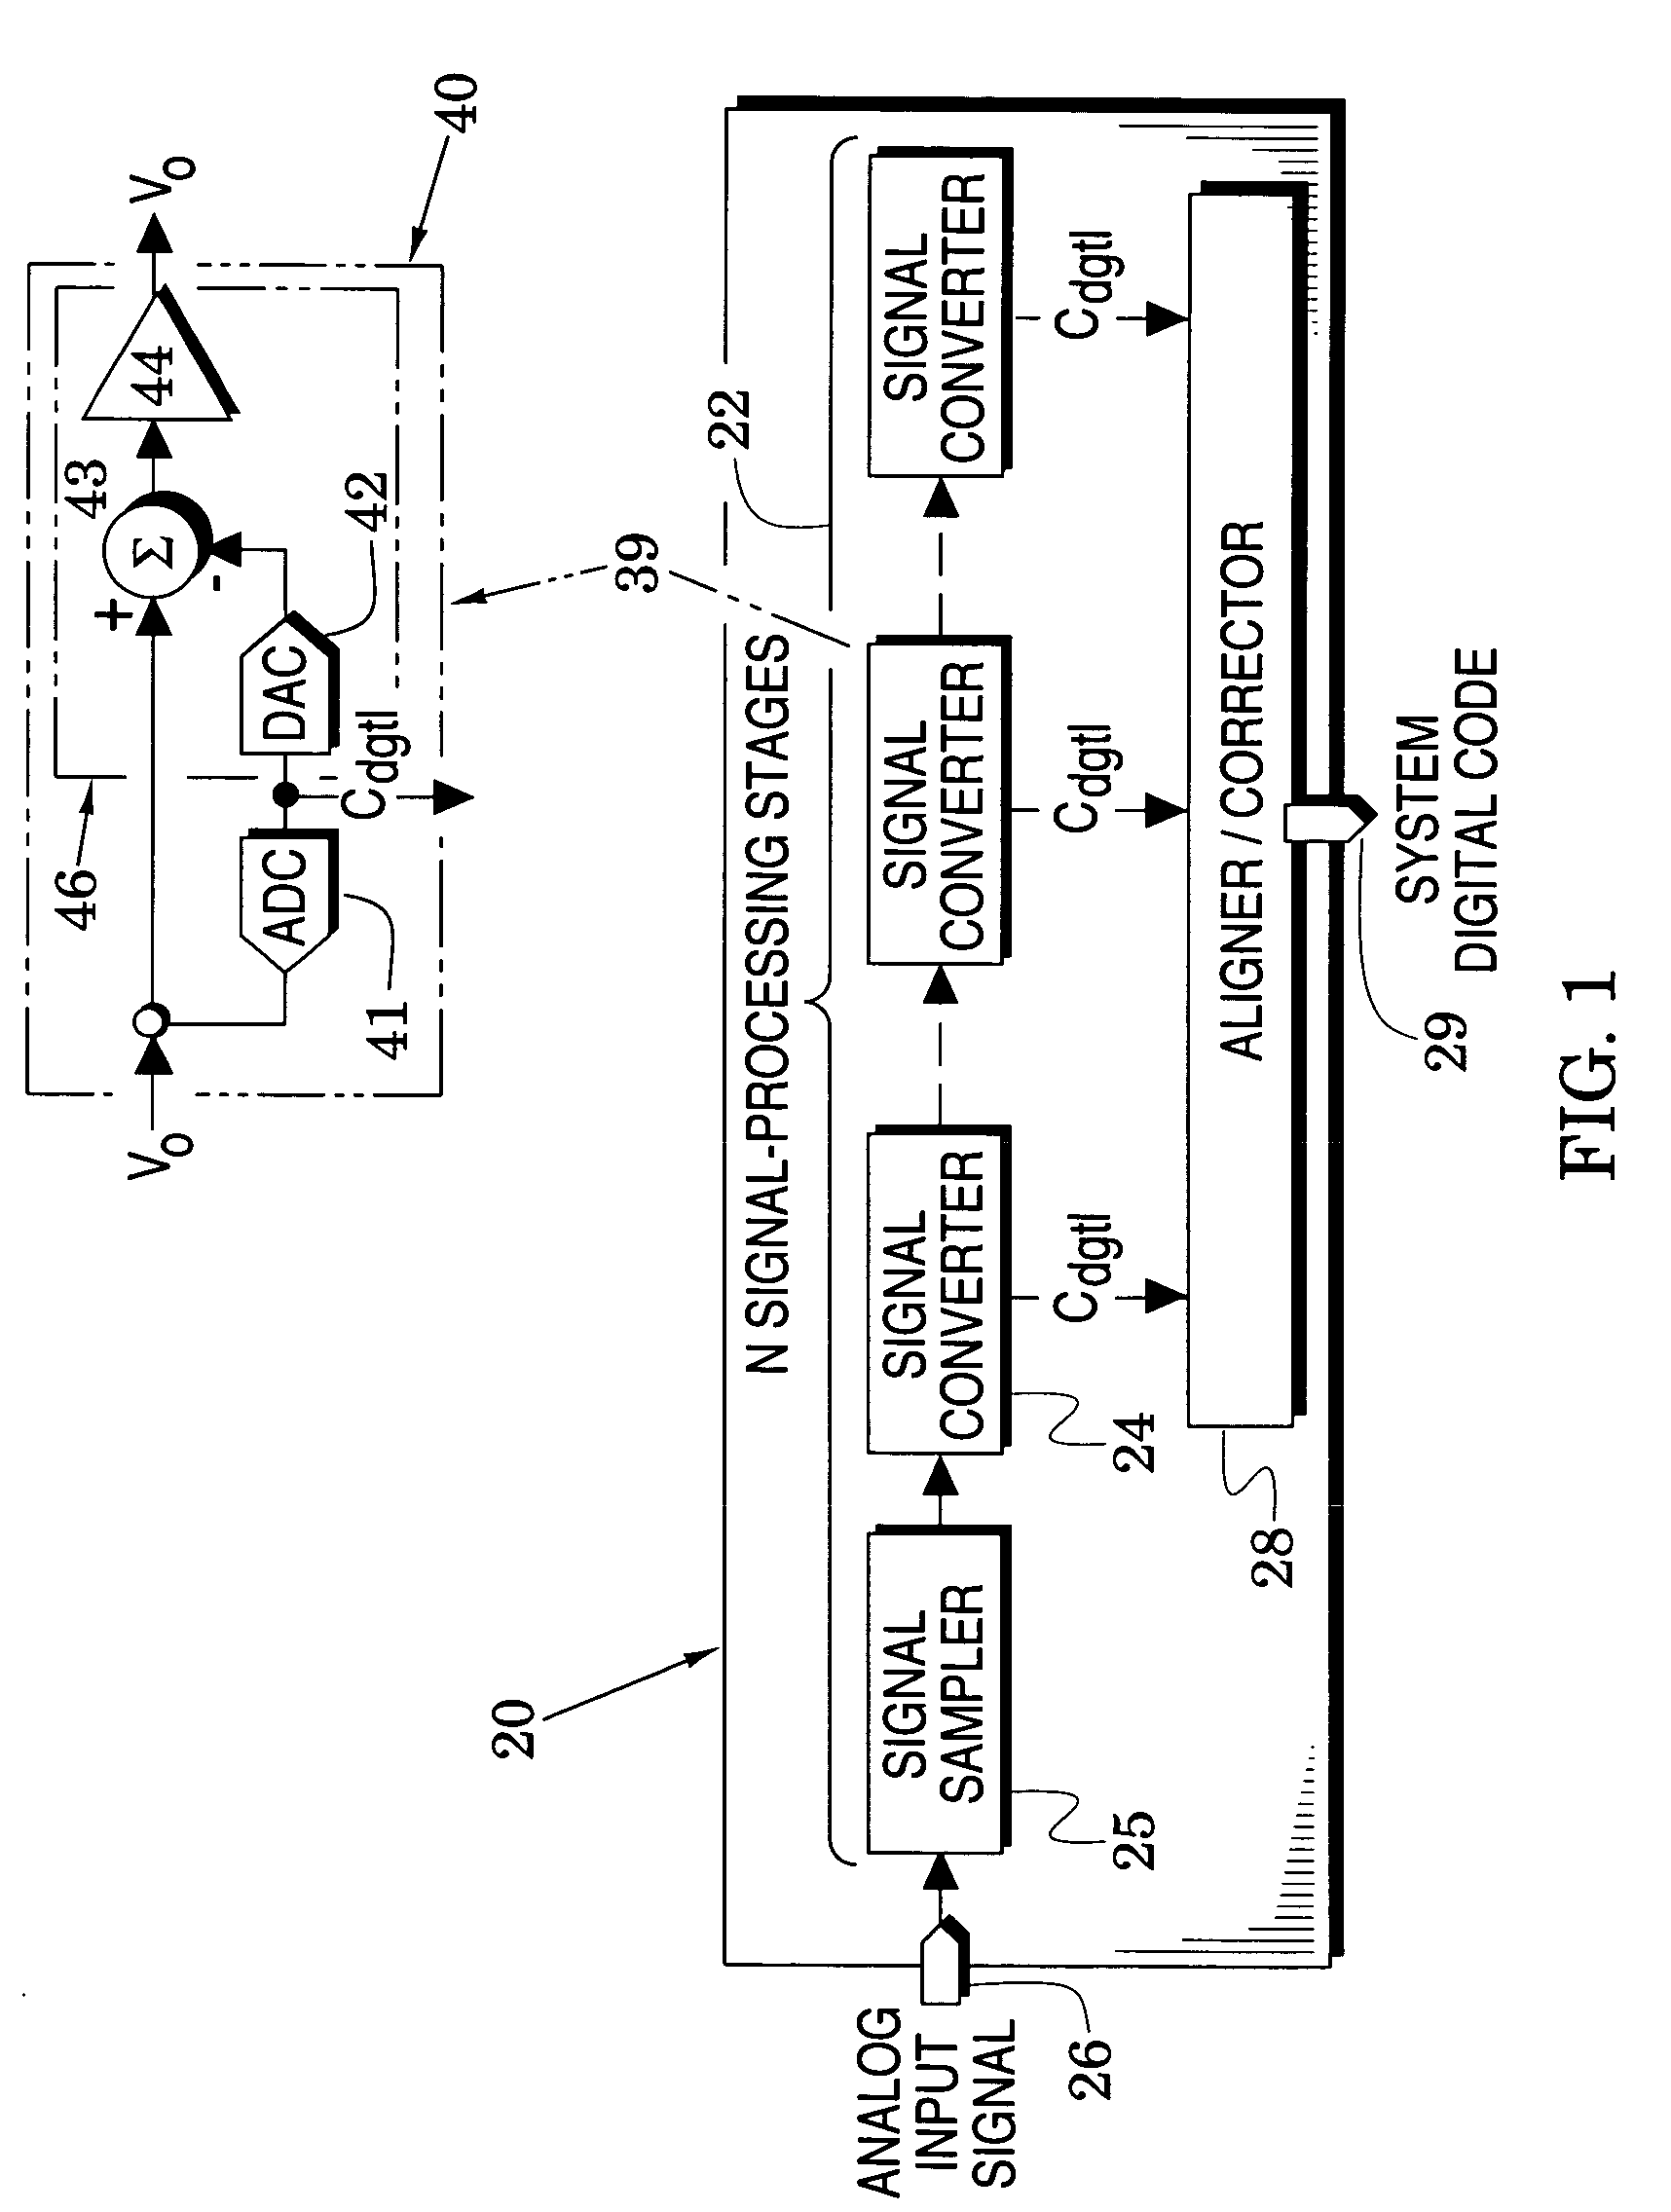 Pipelined converter systems with enhanced accuracy